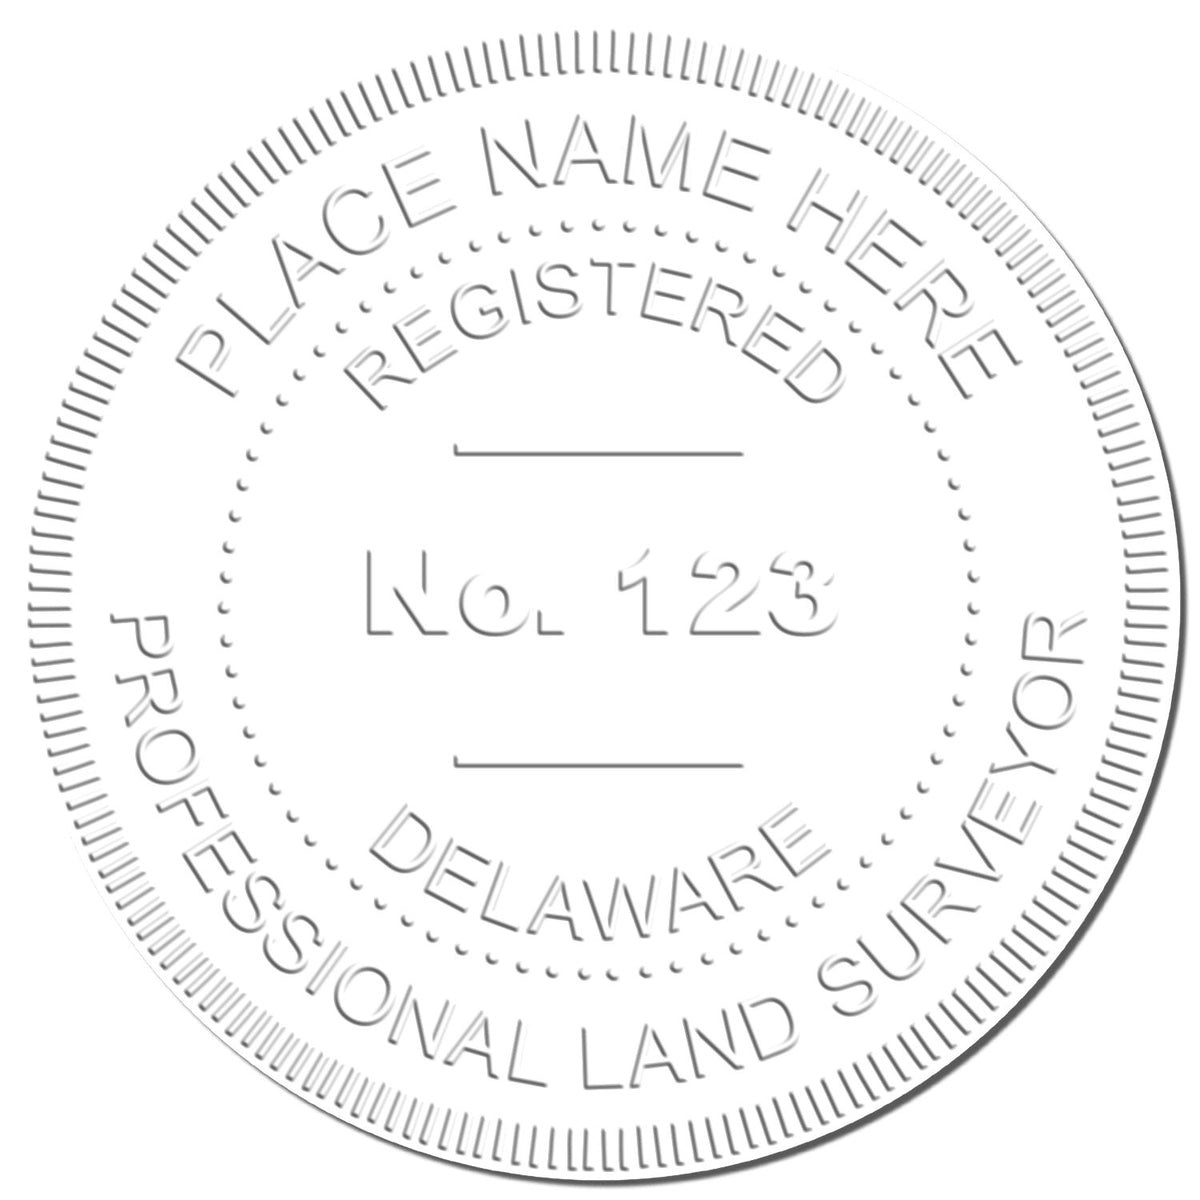 This paper is stamped with a sample imprint of the Delaware Desk Surveyor Seal Embosser, signifying its quality and reliability.